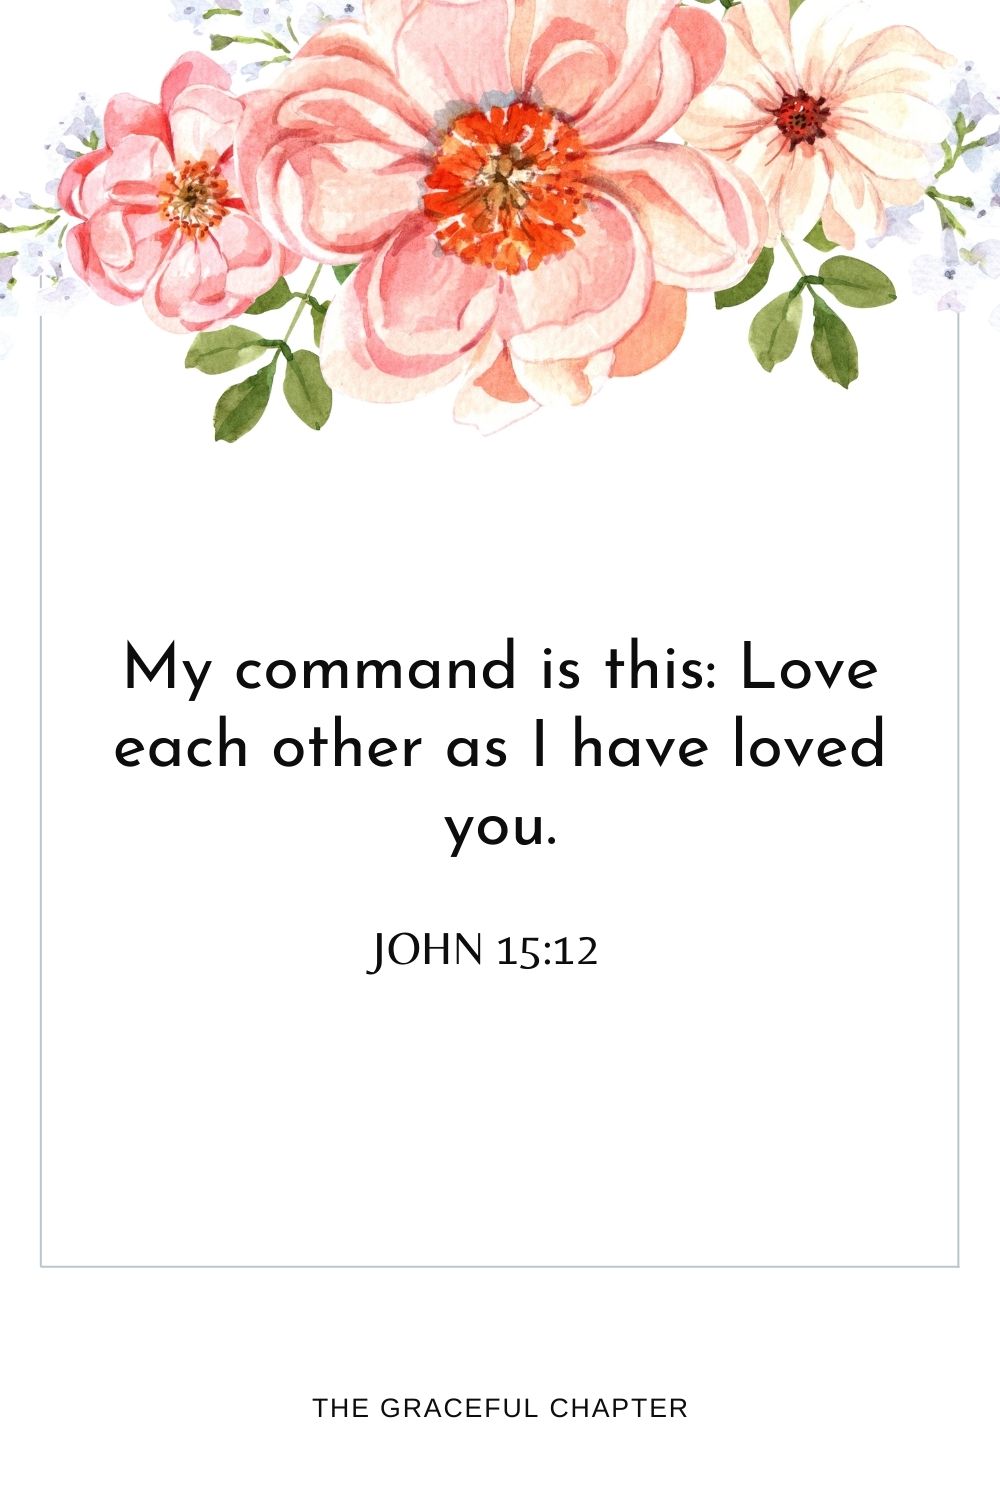 My command is this: Love each other as I have loved you. John 15:12